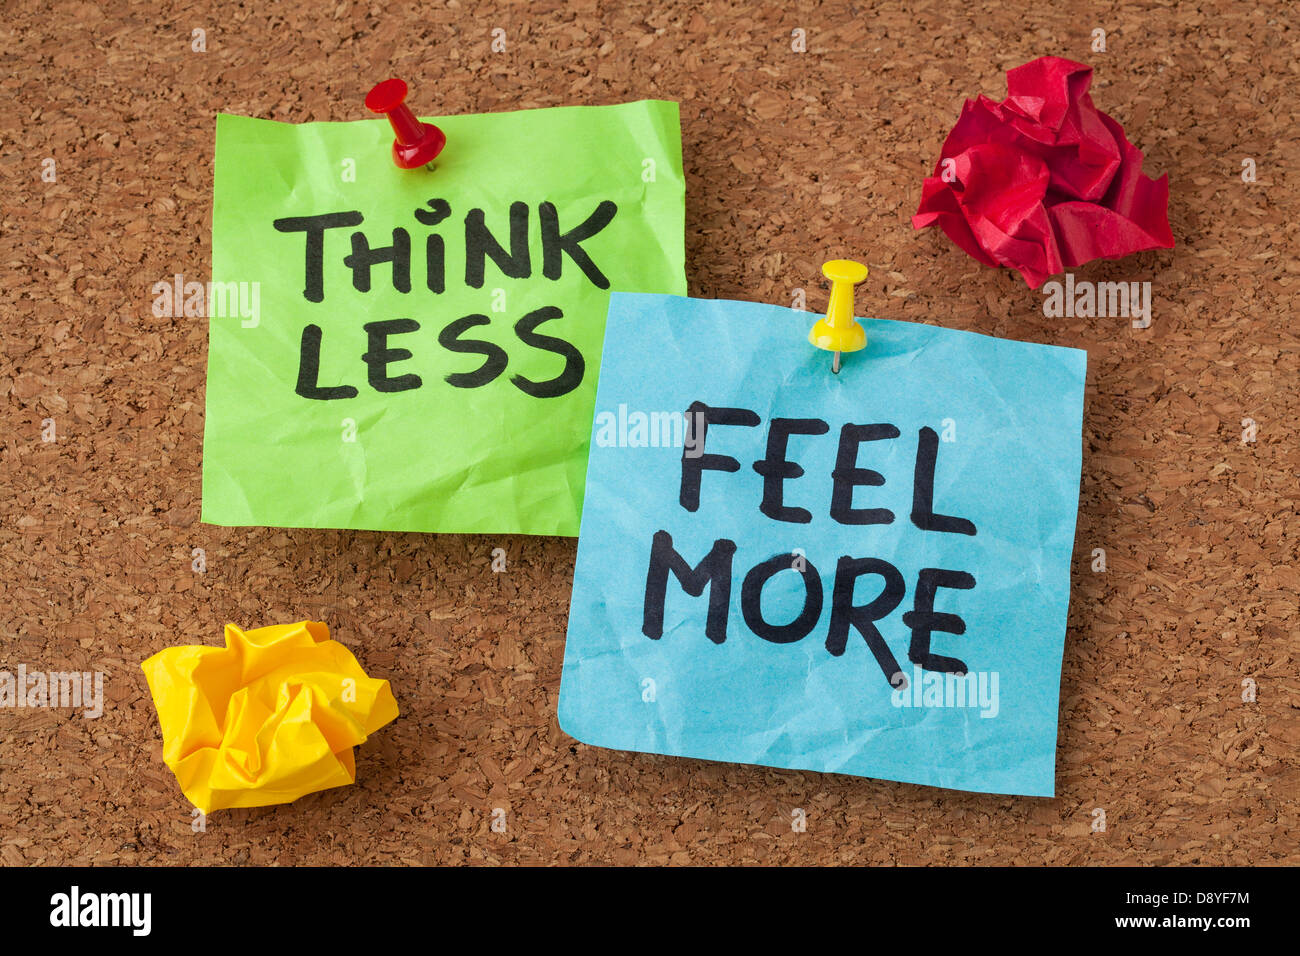 think less, feel more - words of wisdom - handwriting on colorful sticky notes Stock Photo